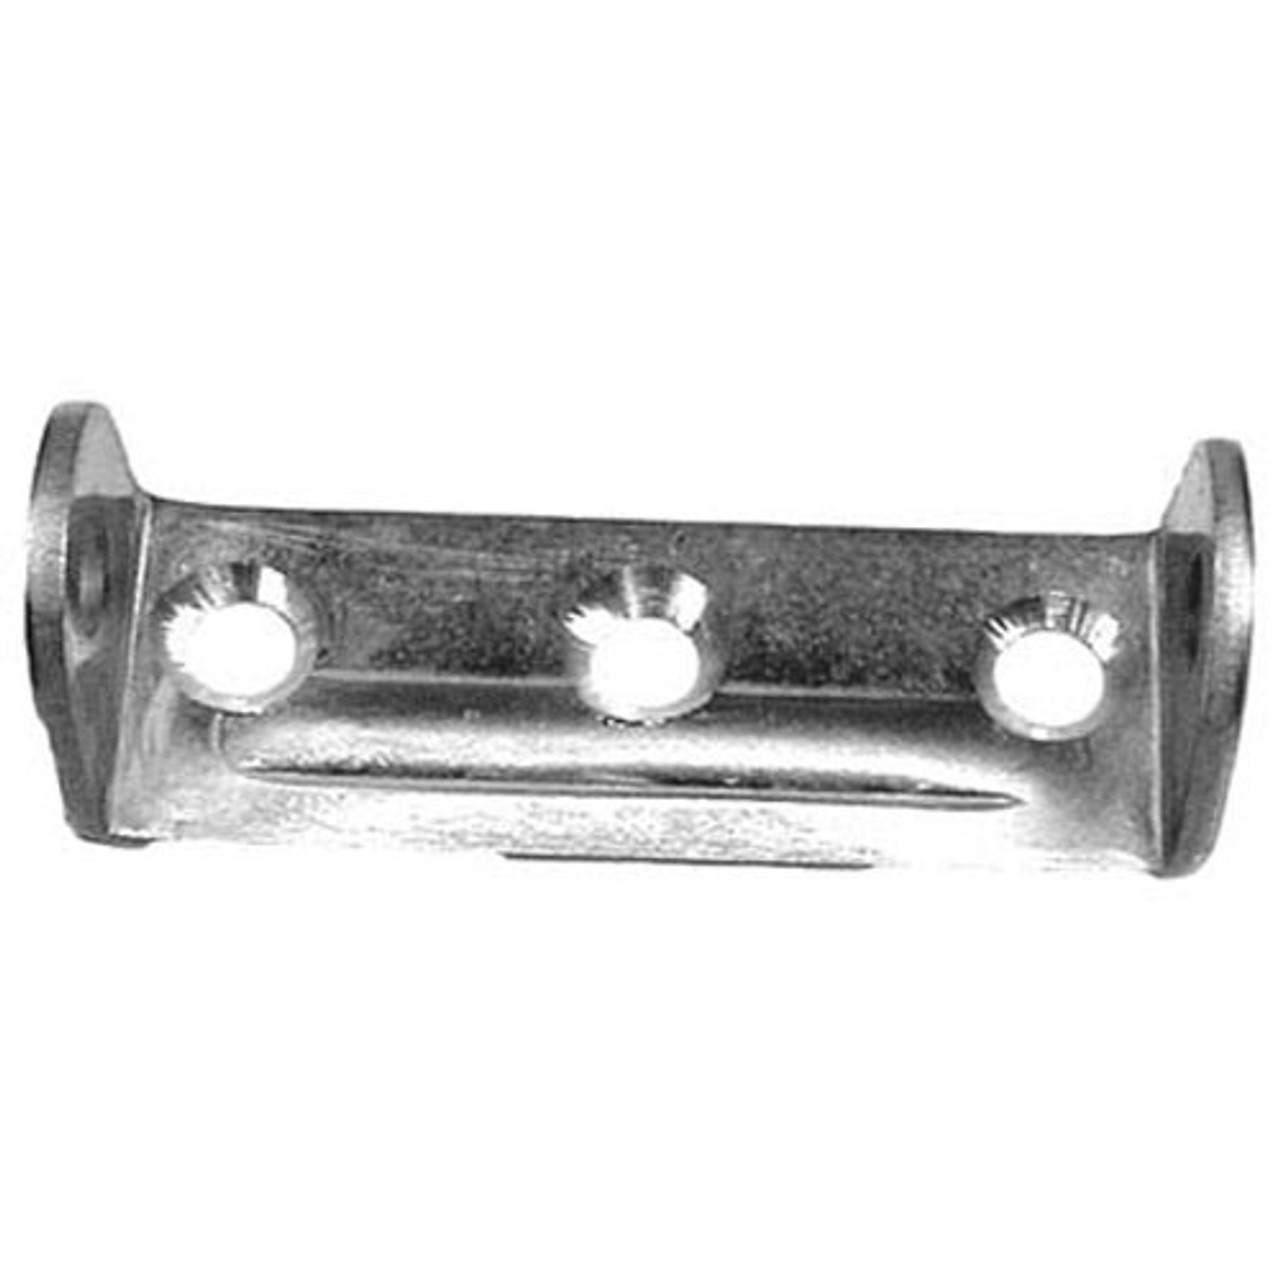 Hinge Base - Replacement Part For Seco 739360